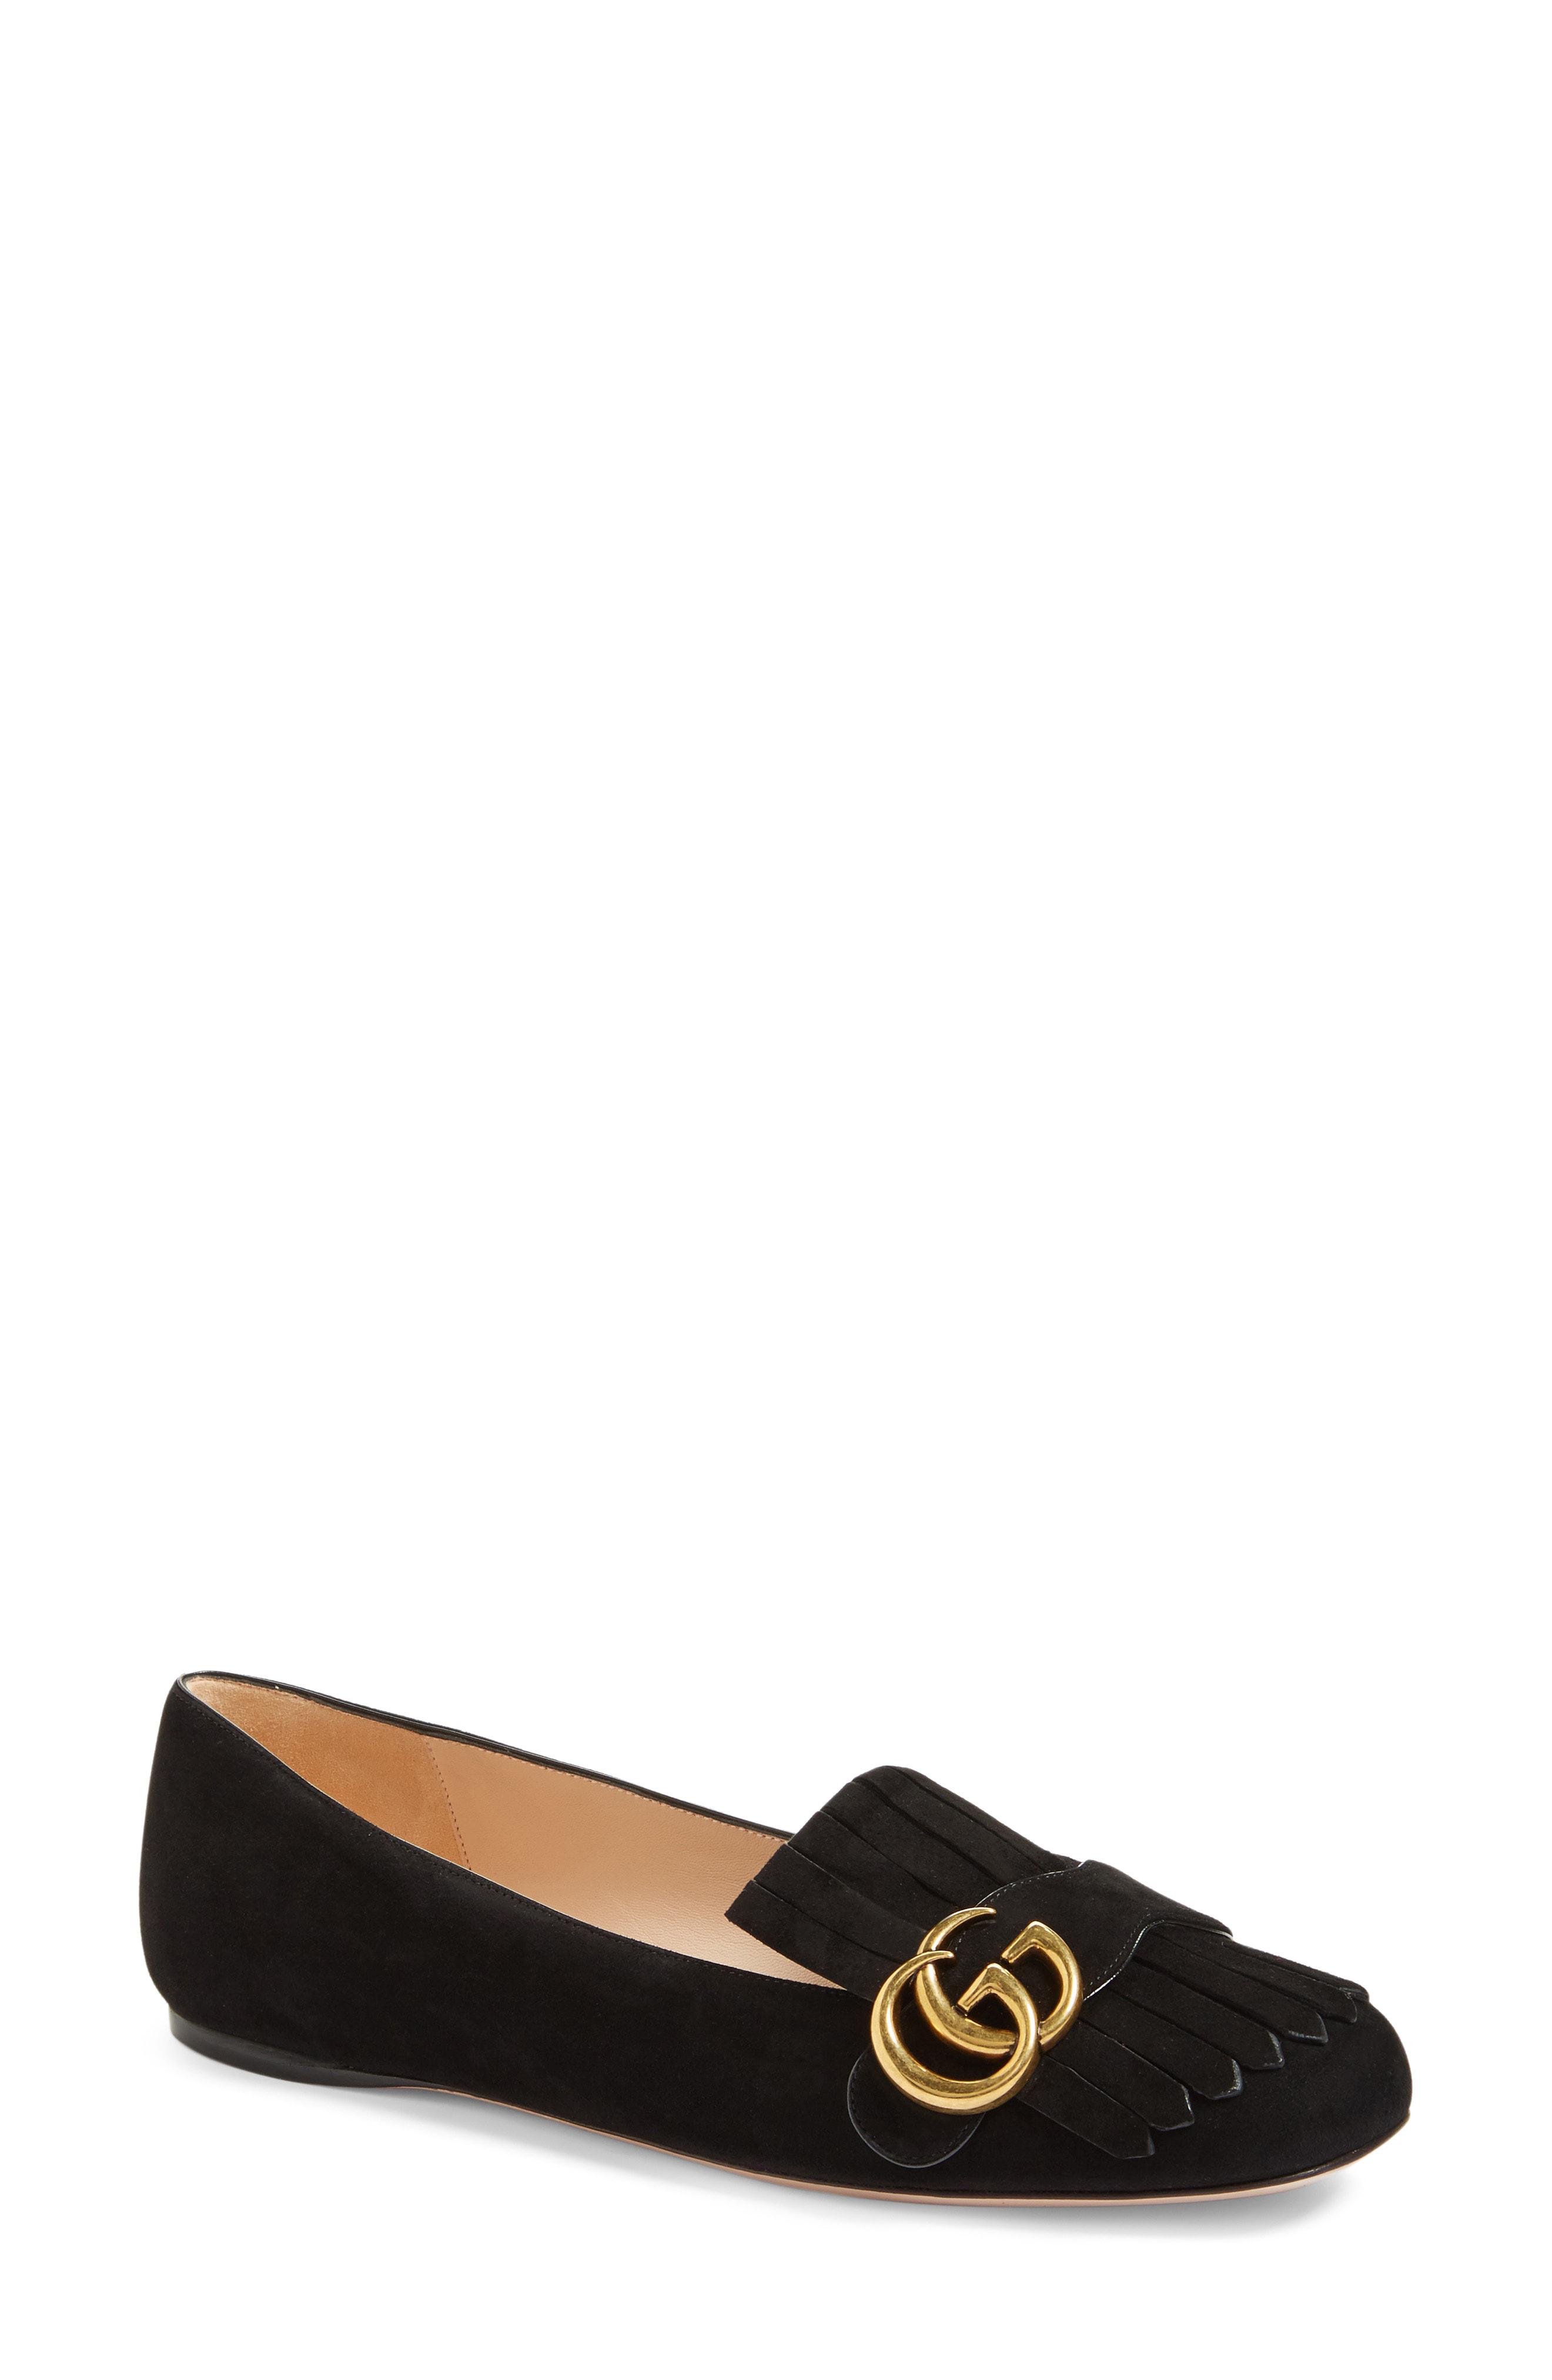 Gucci Suede Gg Marmont Fringe Flat in 